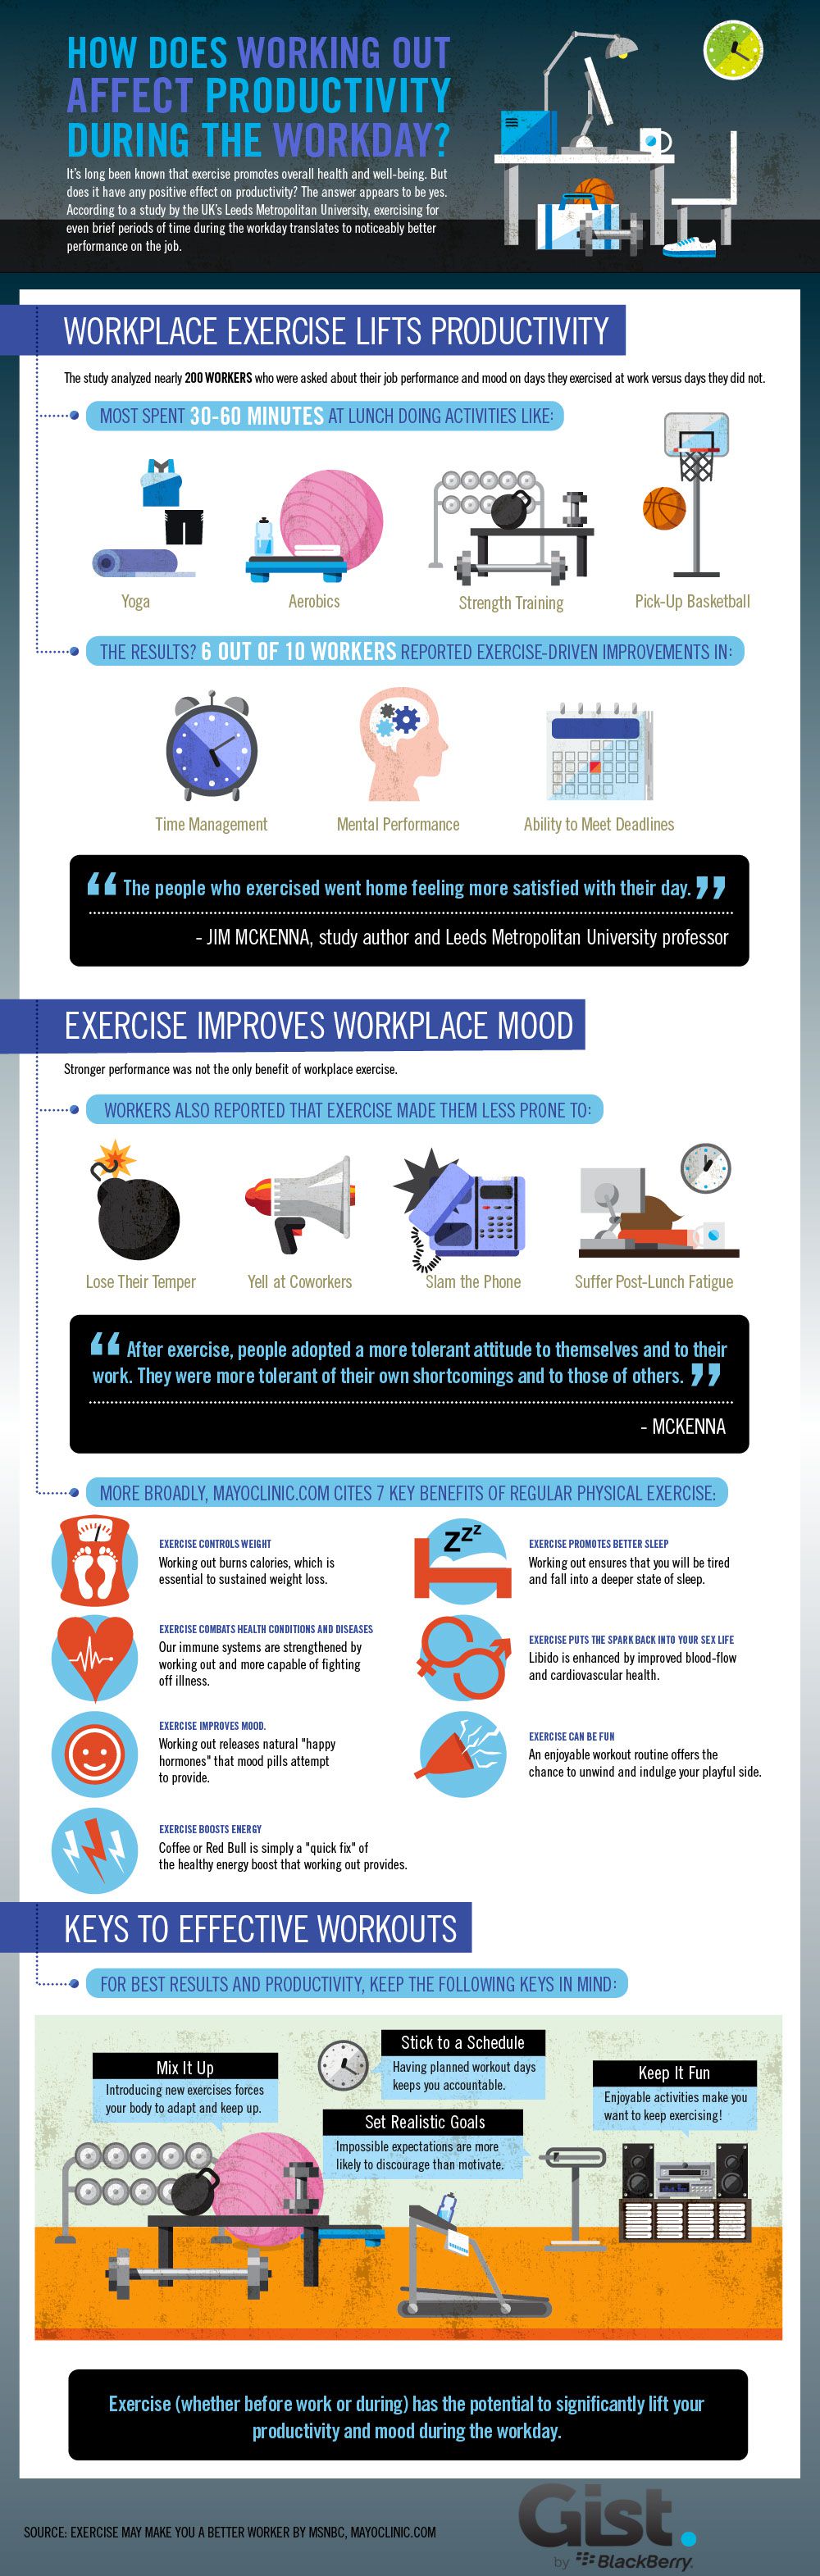 working out productivity infographic